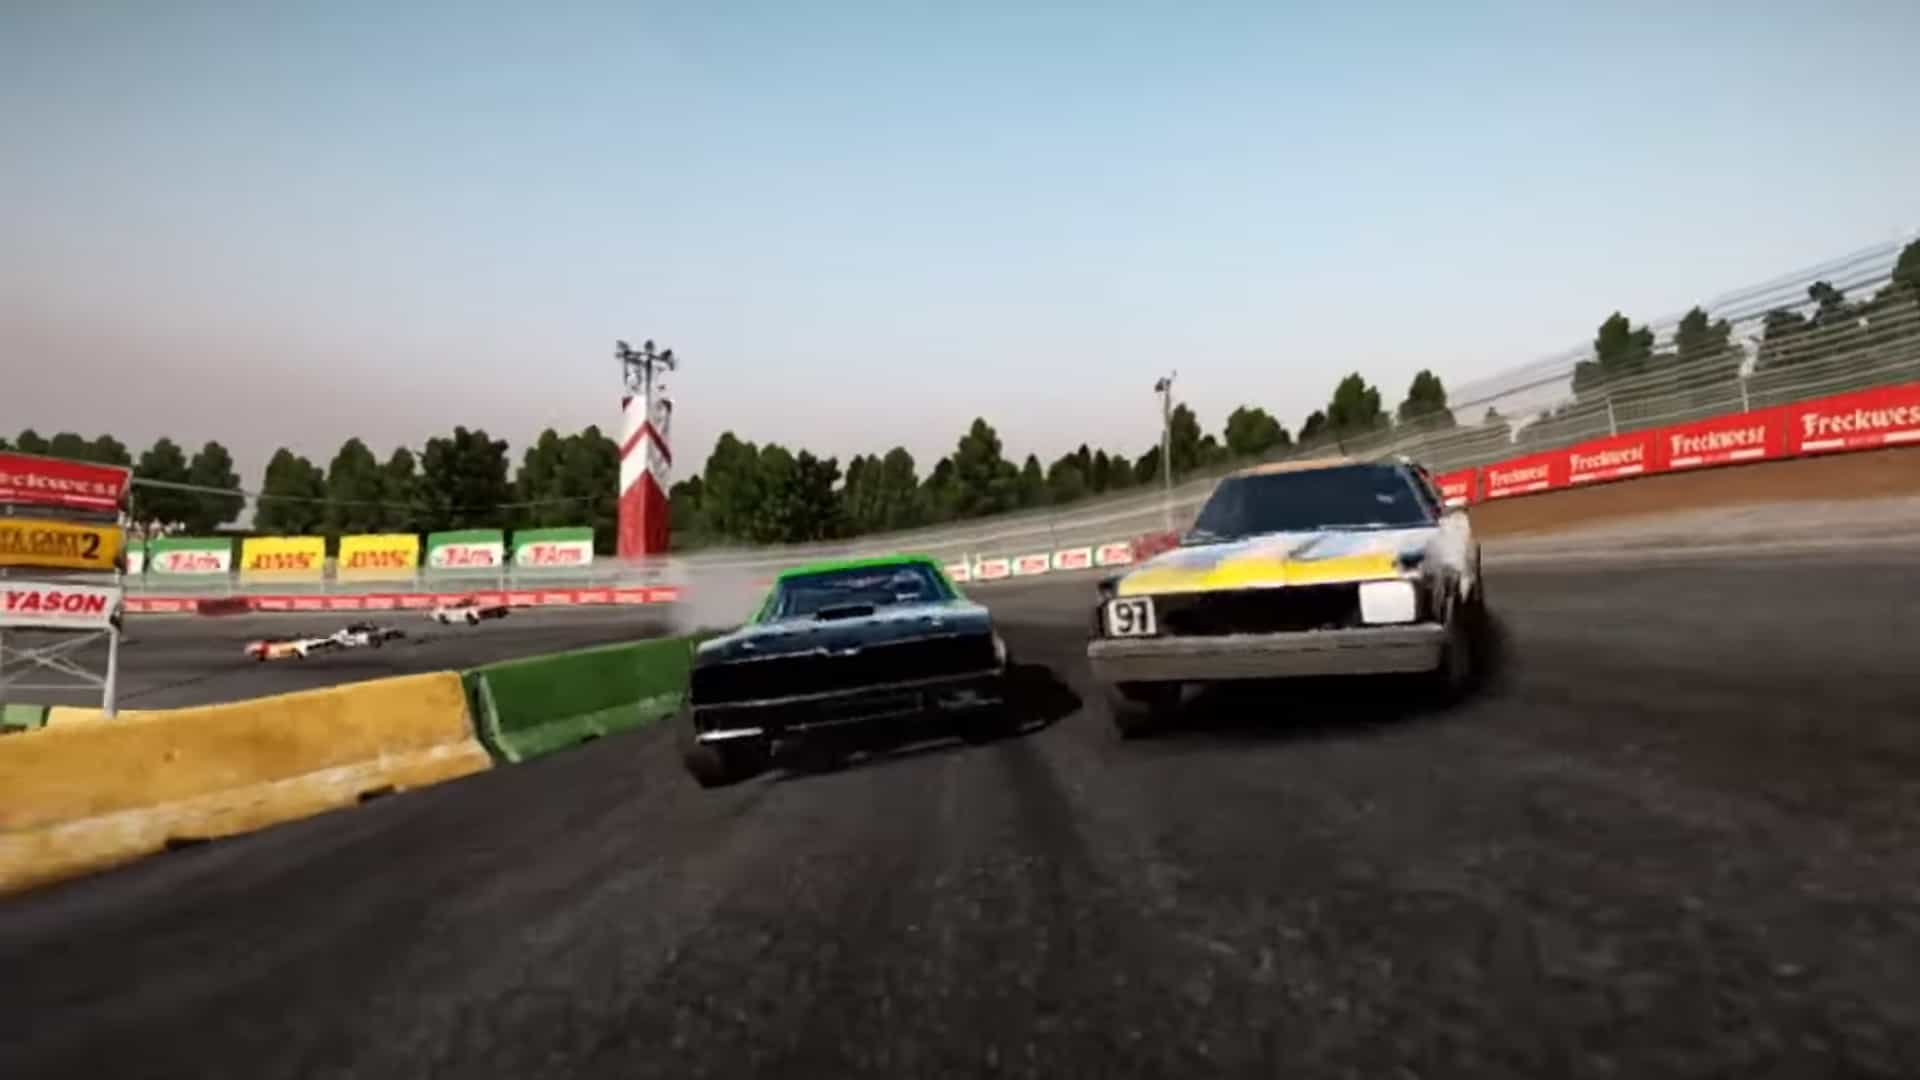 Wreckfest is coming to Nintendo Switch later this year